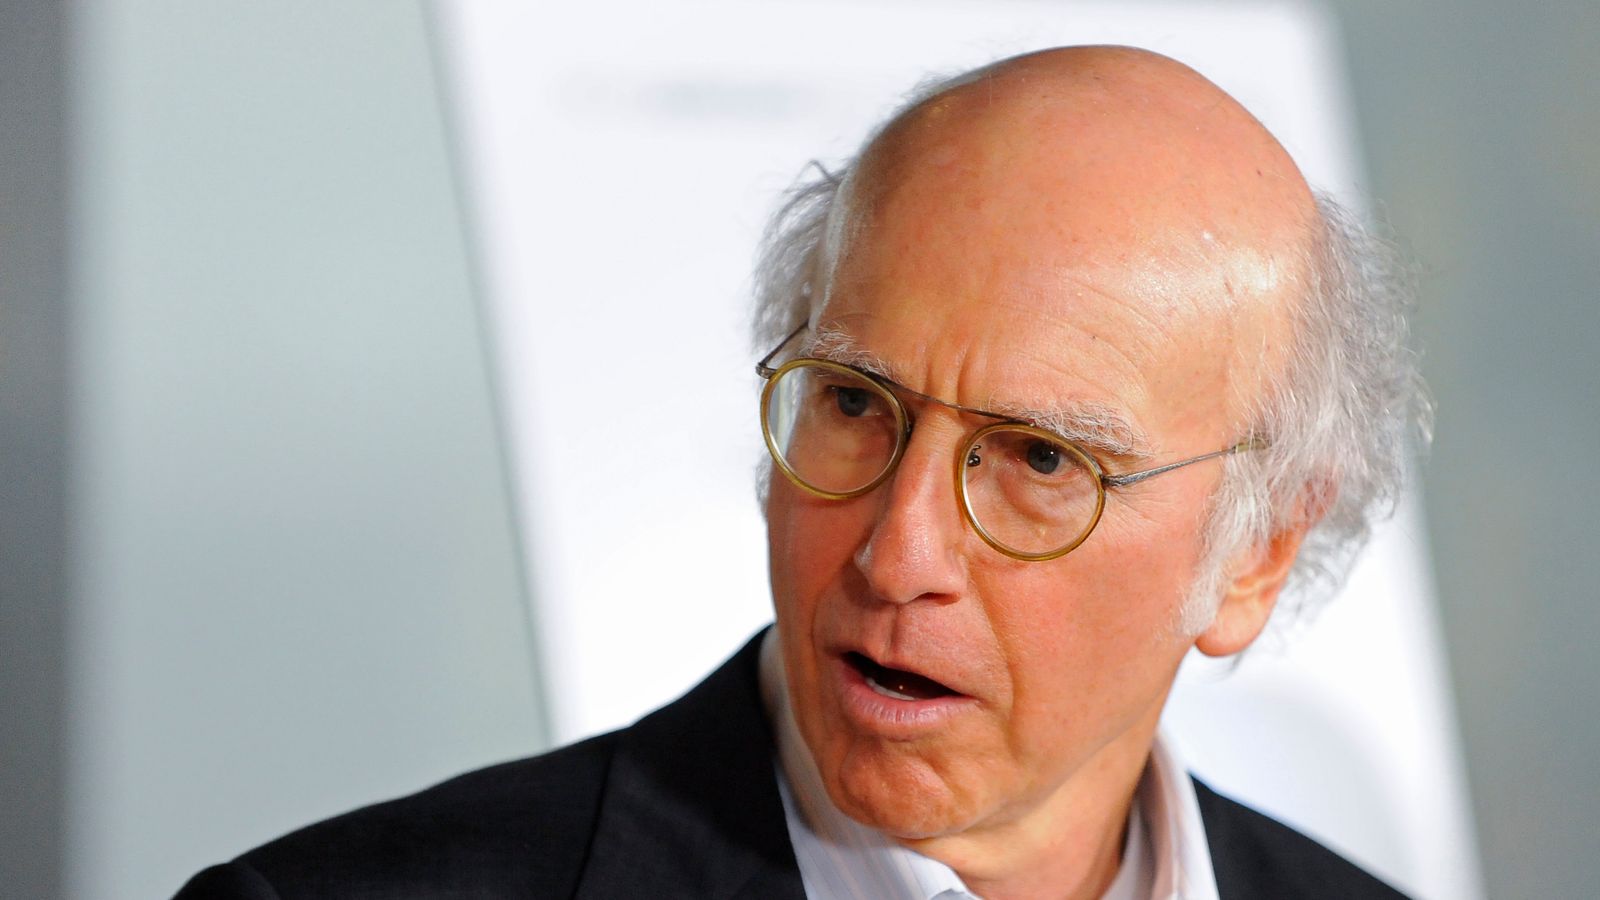 Curb Your Enthusiasm to officially end after 24 years